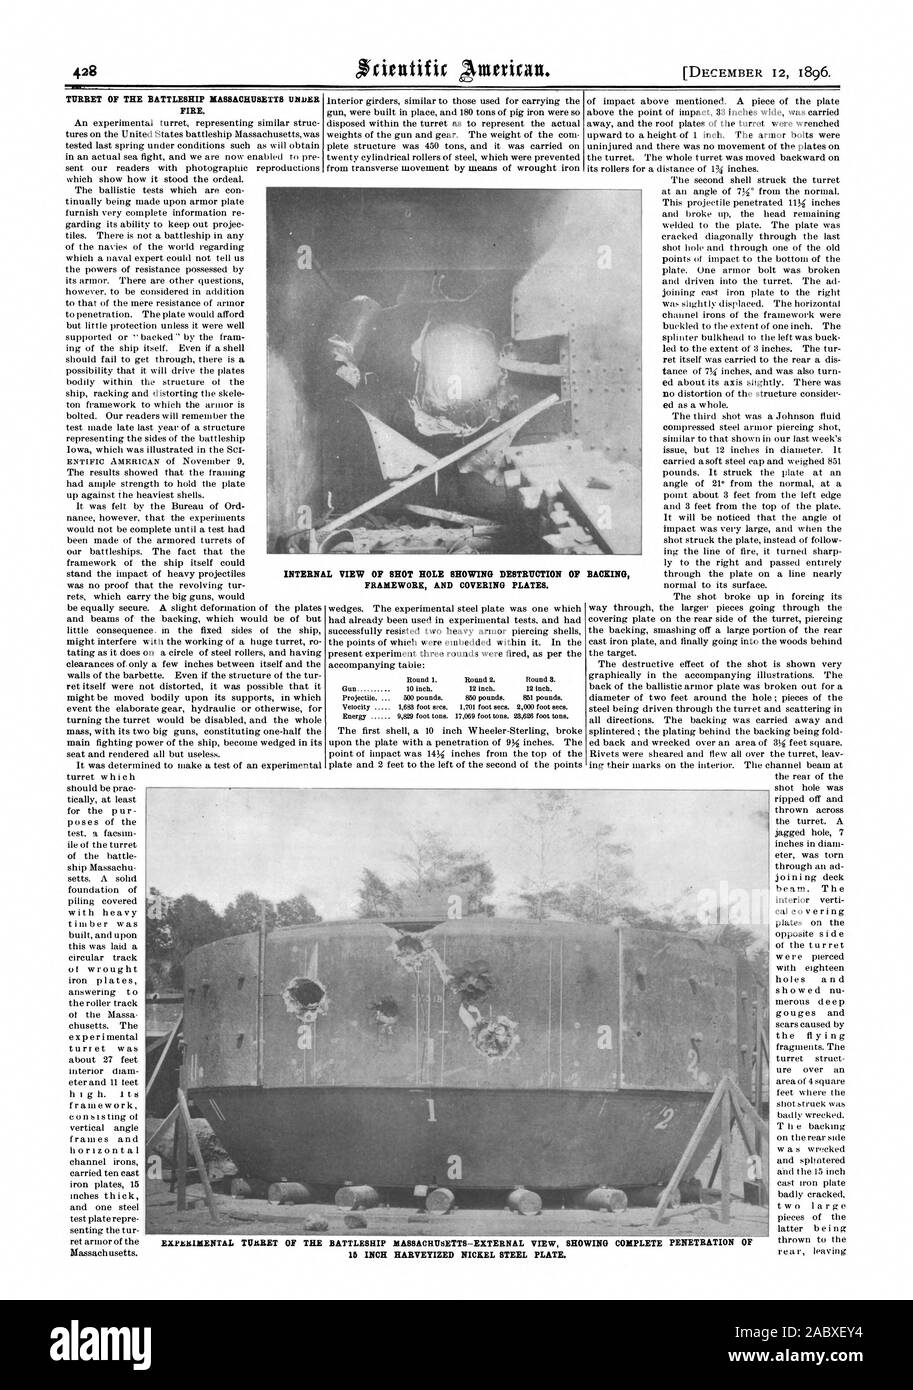 TURRET OF THE BATTLESHIP MASSACHUSETTS UNDER FIRE. badly wrecked. INTERNAL VIEW OF SHOT HOLE SHOWING DESTRUCTION OF BACKING FRAMEWORK AND COVERING PLATES. 16 INCH HARVEYIZED NICKEL STEEL PLATE., scientific american, 1896-12-12 Stock Photo